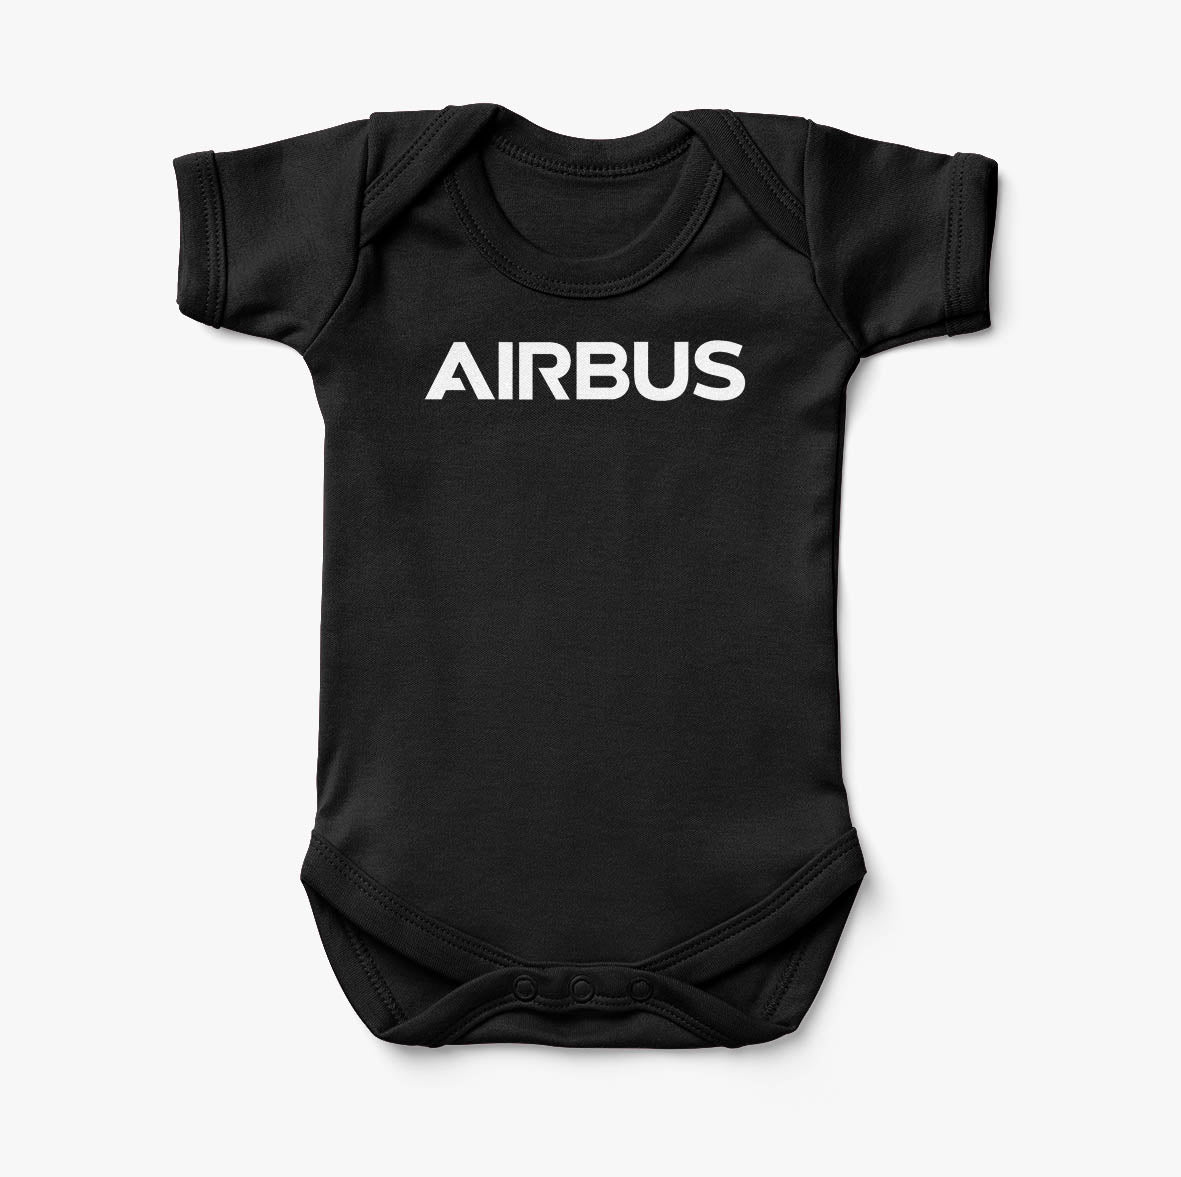 Airbus & Text Designed Baby Bodysuits